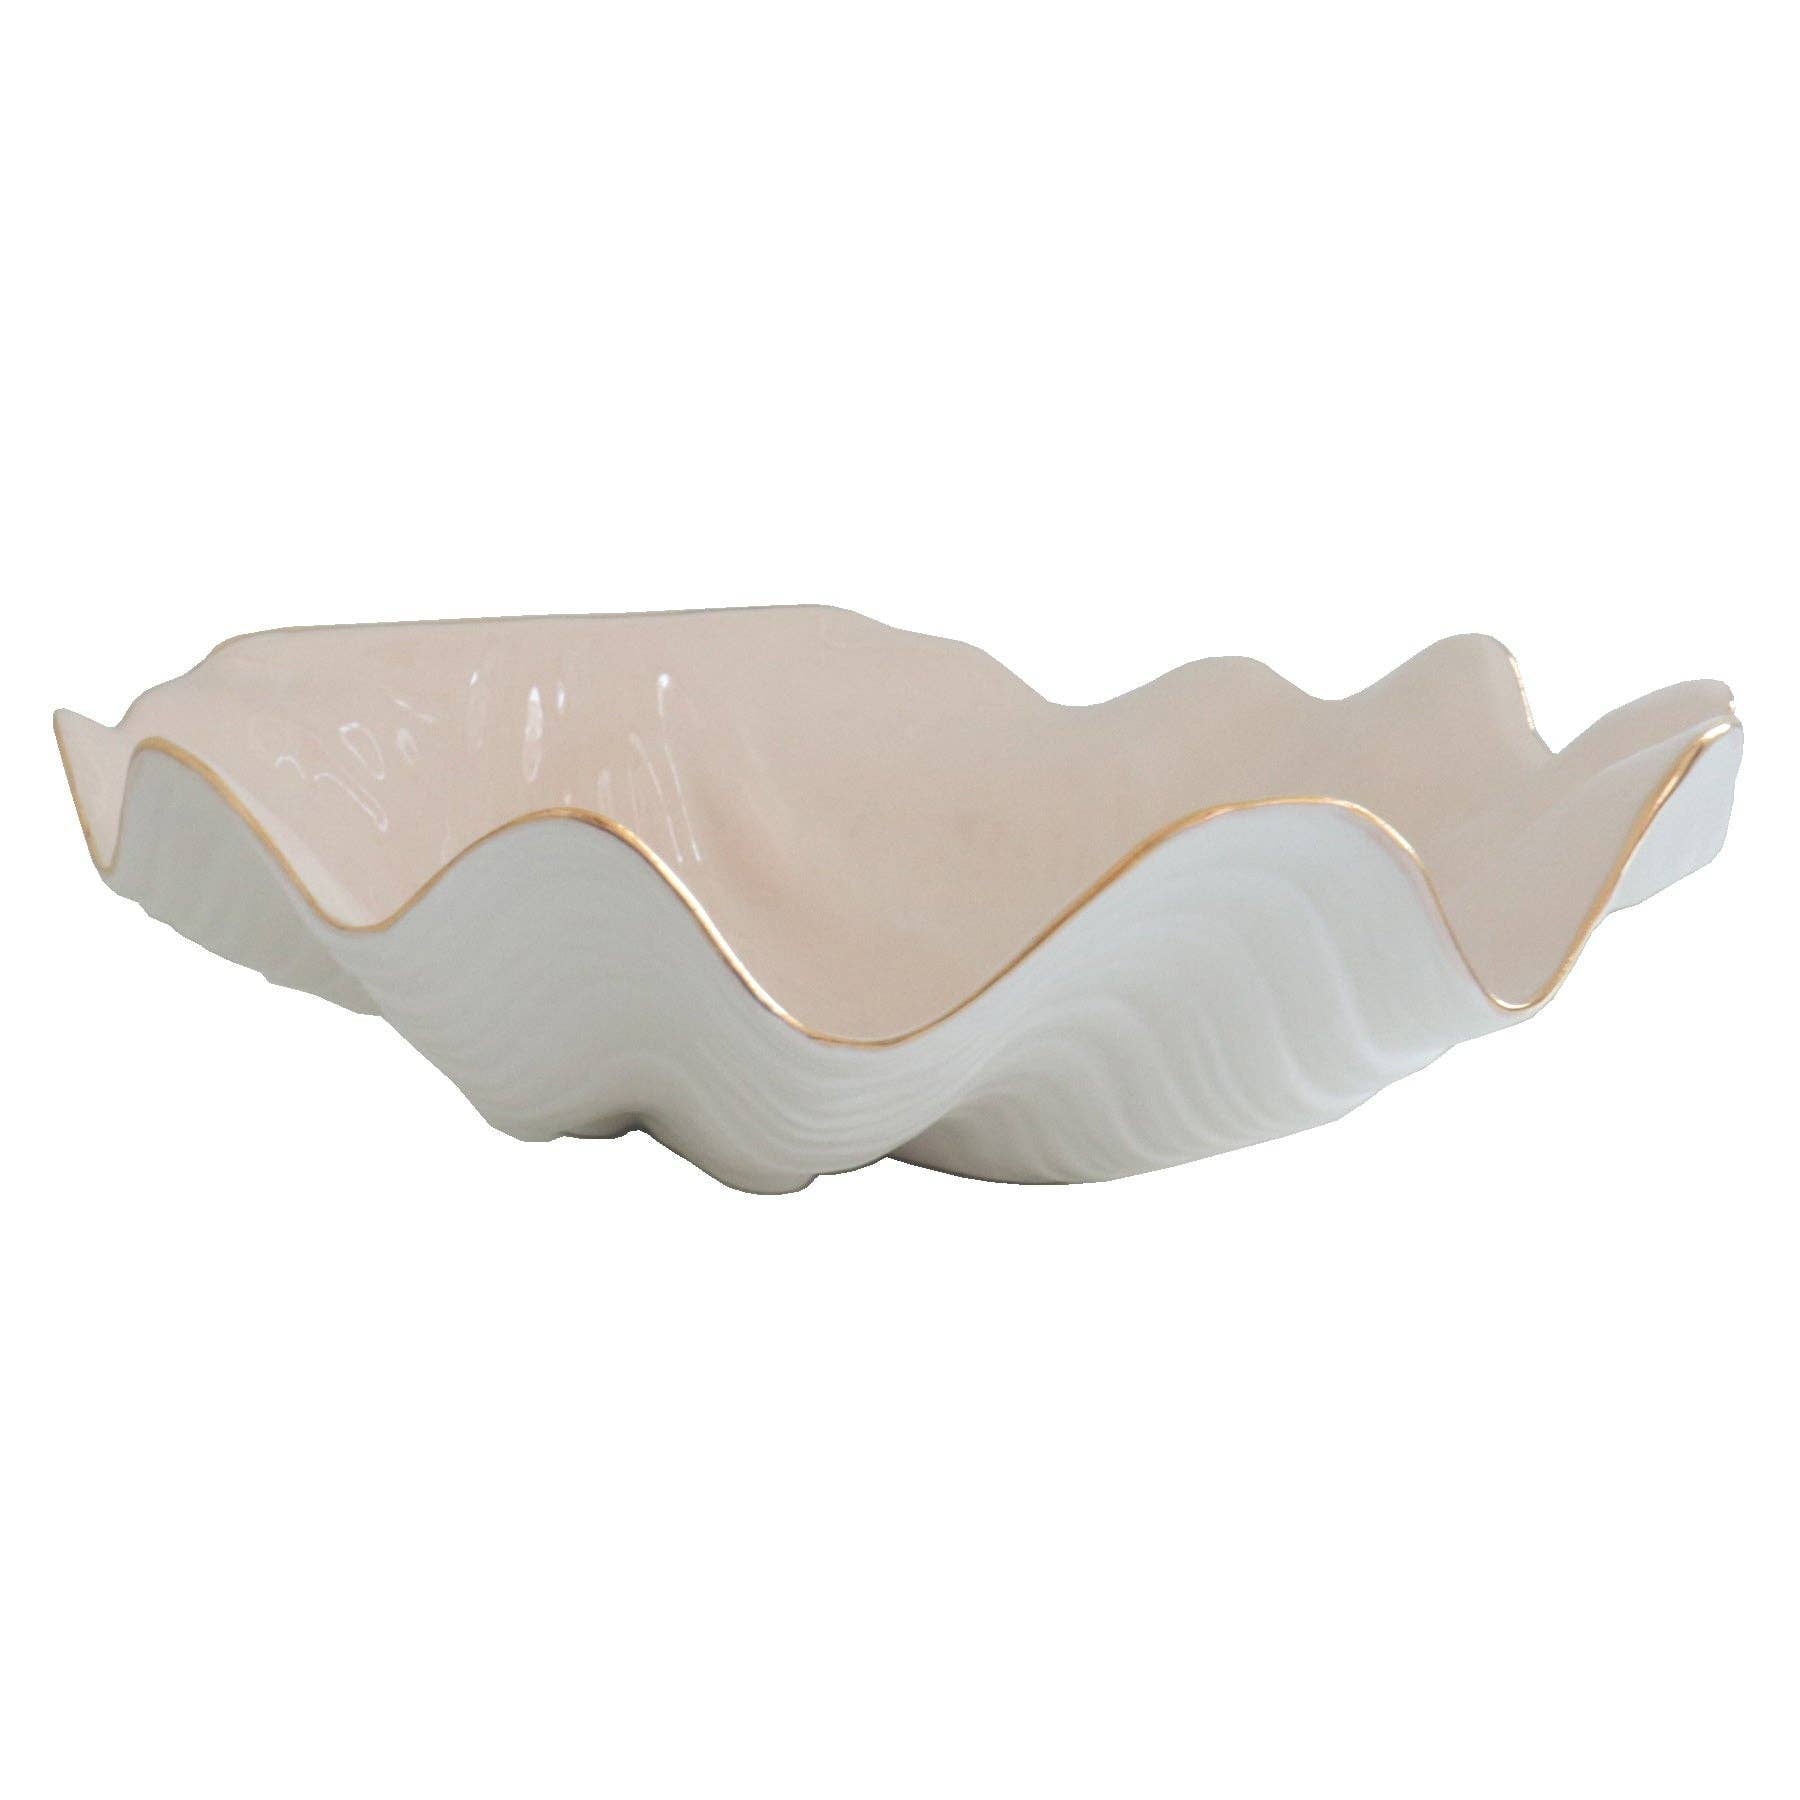 Lo Home by Lauren Haskell Designs Clam Shell Bowl with 22K Gold Accent: Large / Pink - Littlel Birdies